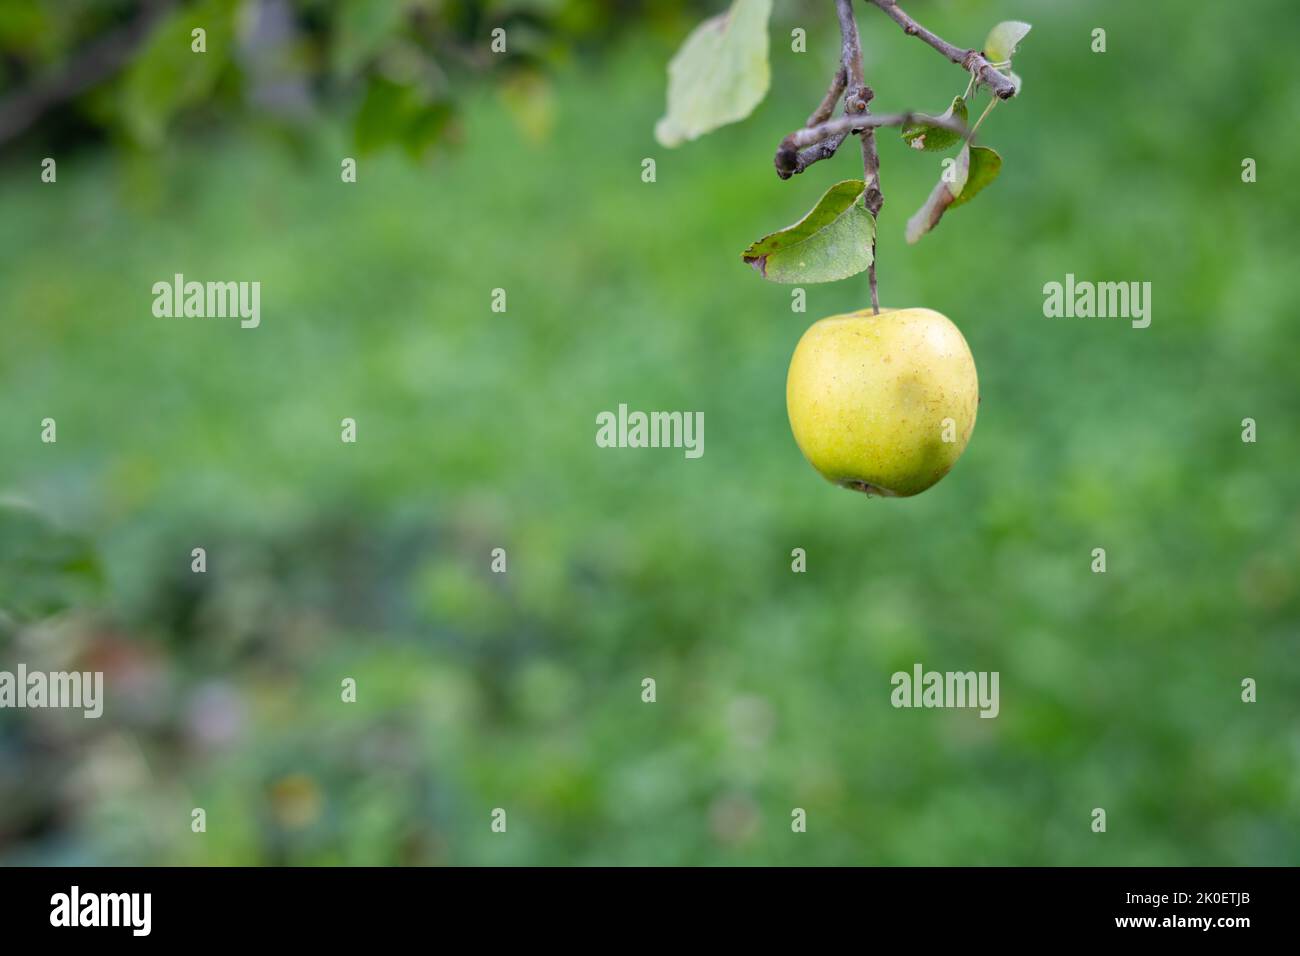 Ripe Golden Delicious apple hanging on branch with blurred background Stock Photo